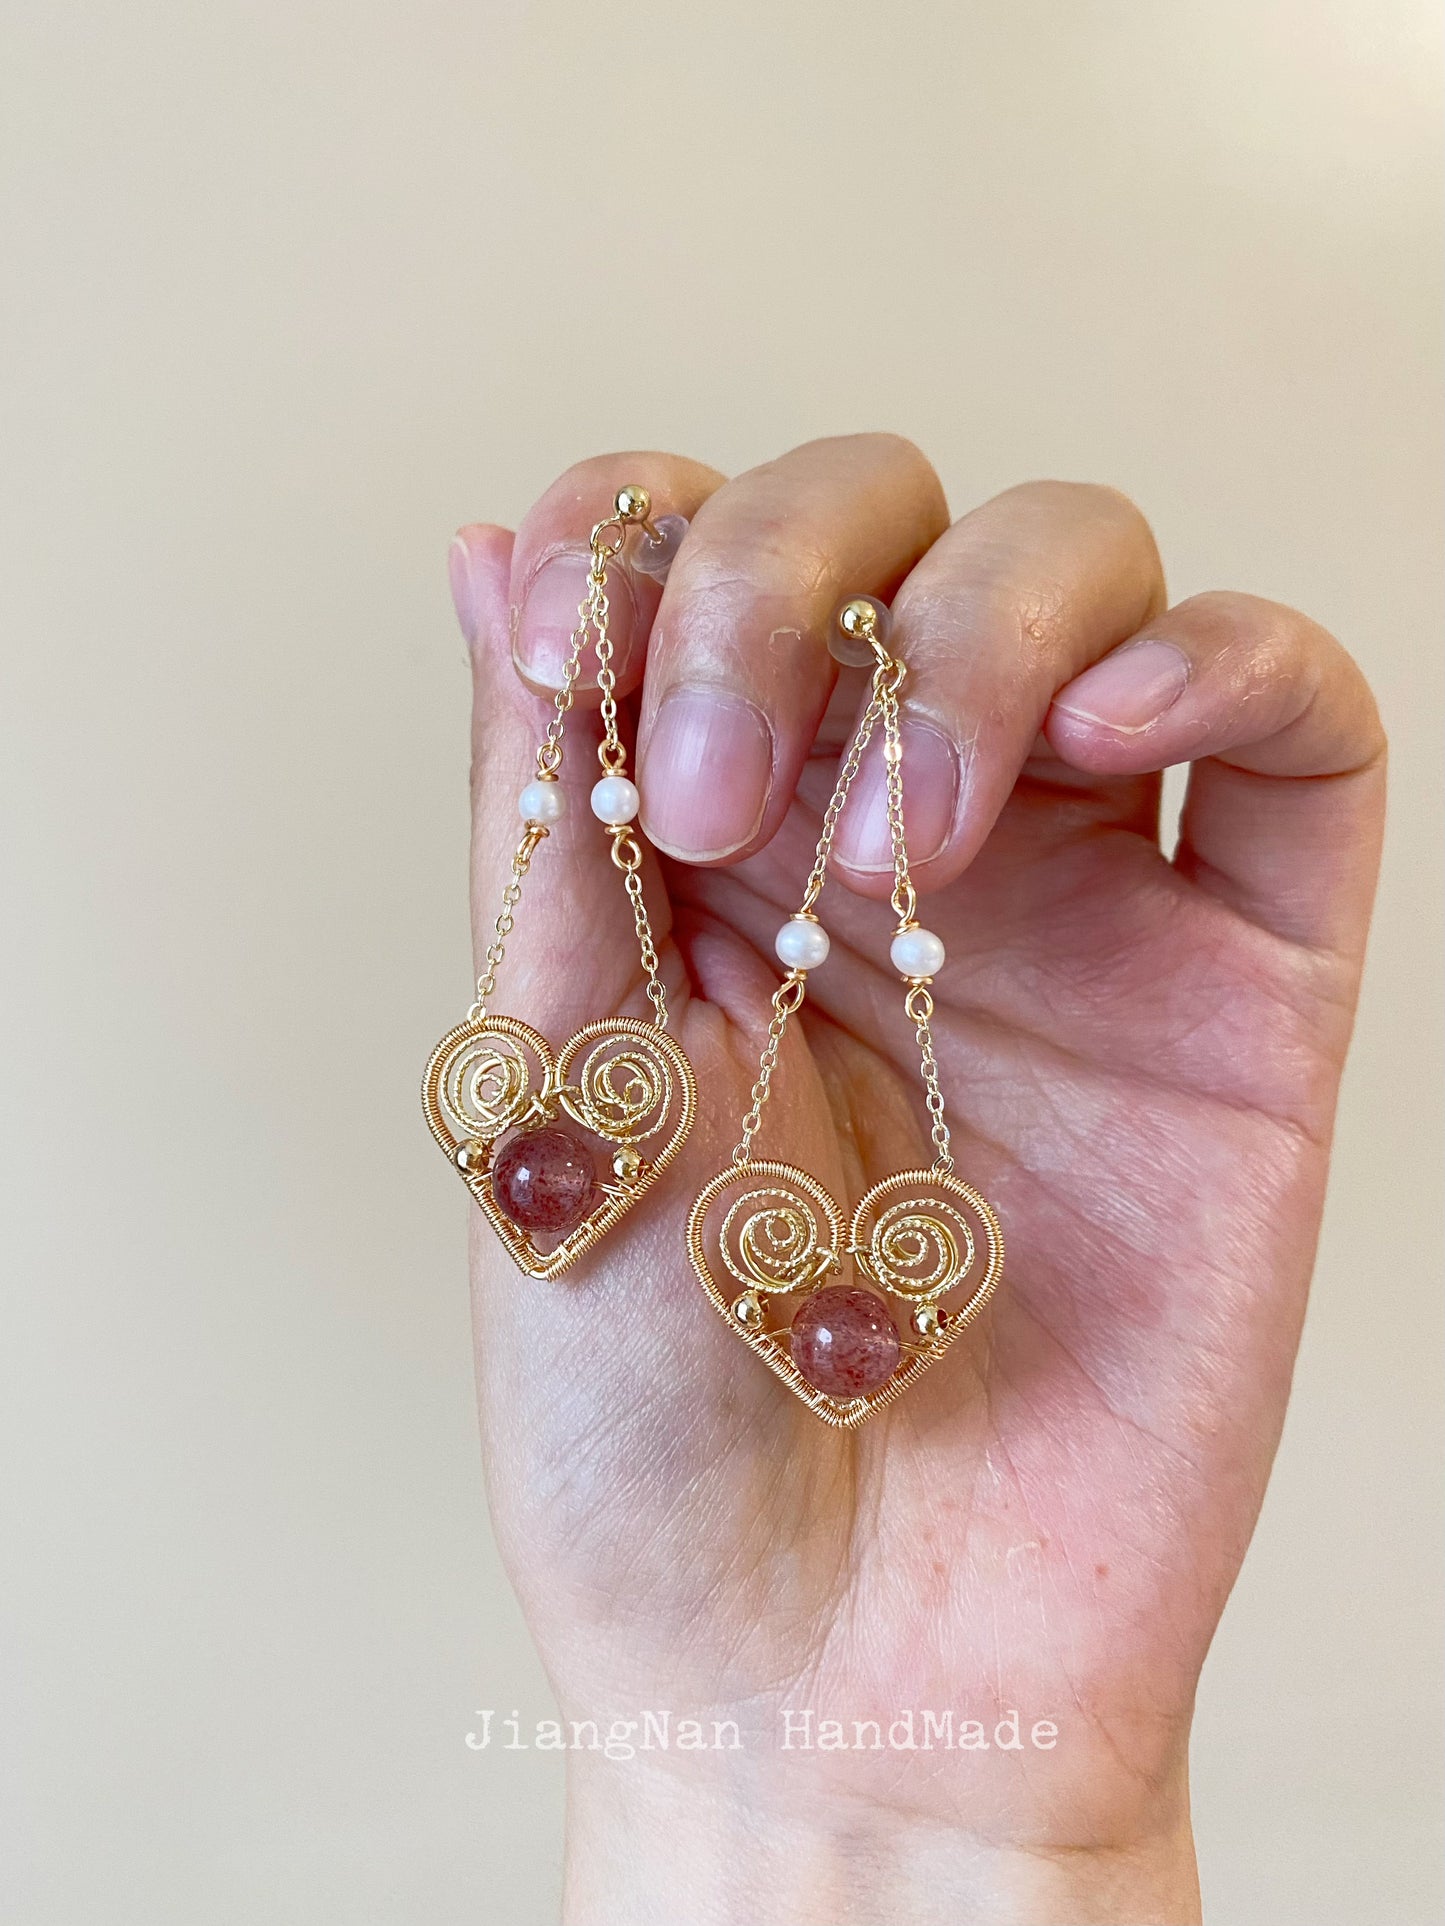 Handmade Heart Shape Earrings with stawberry quatz- Wire Wrapped Jewelry